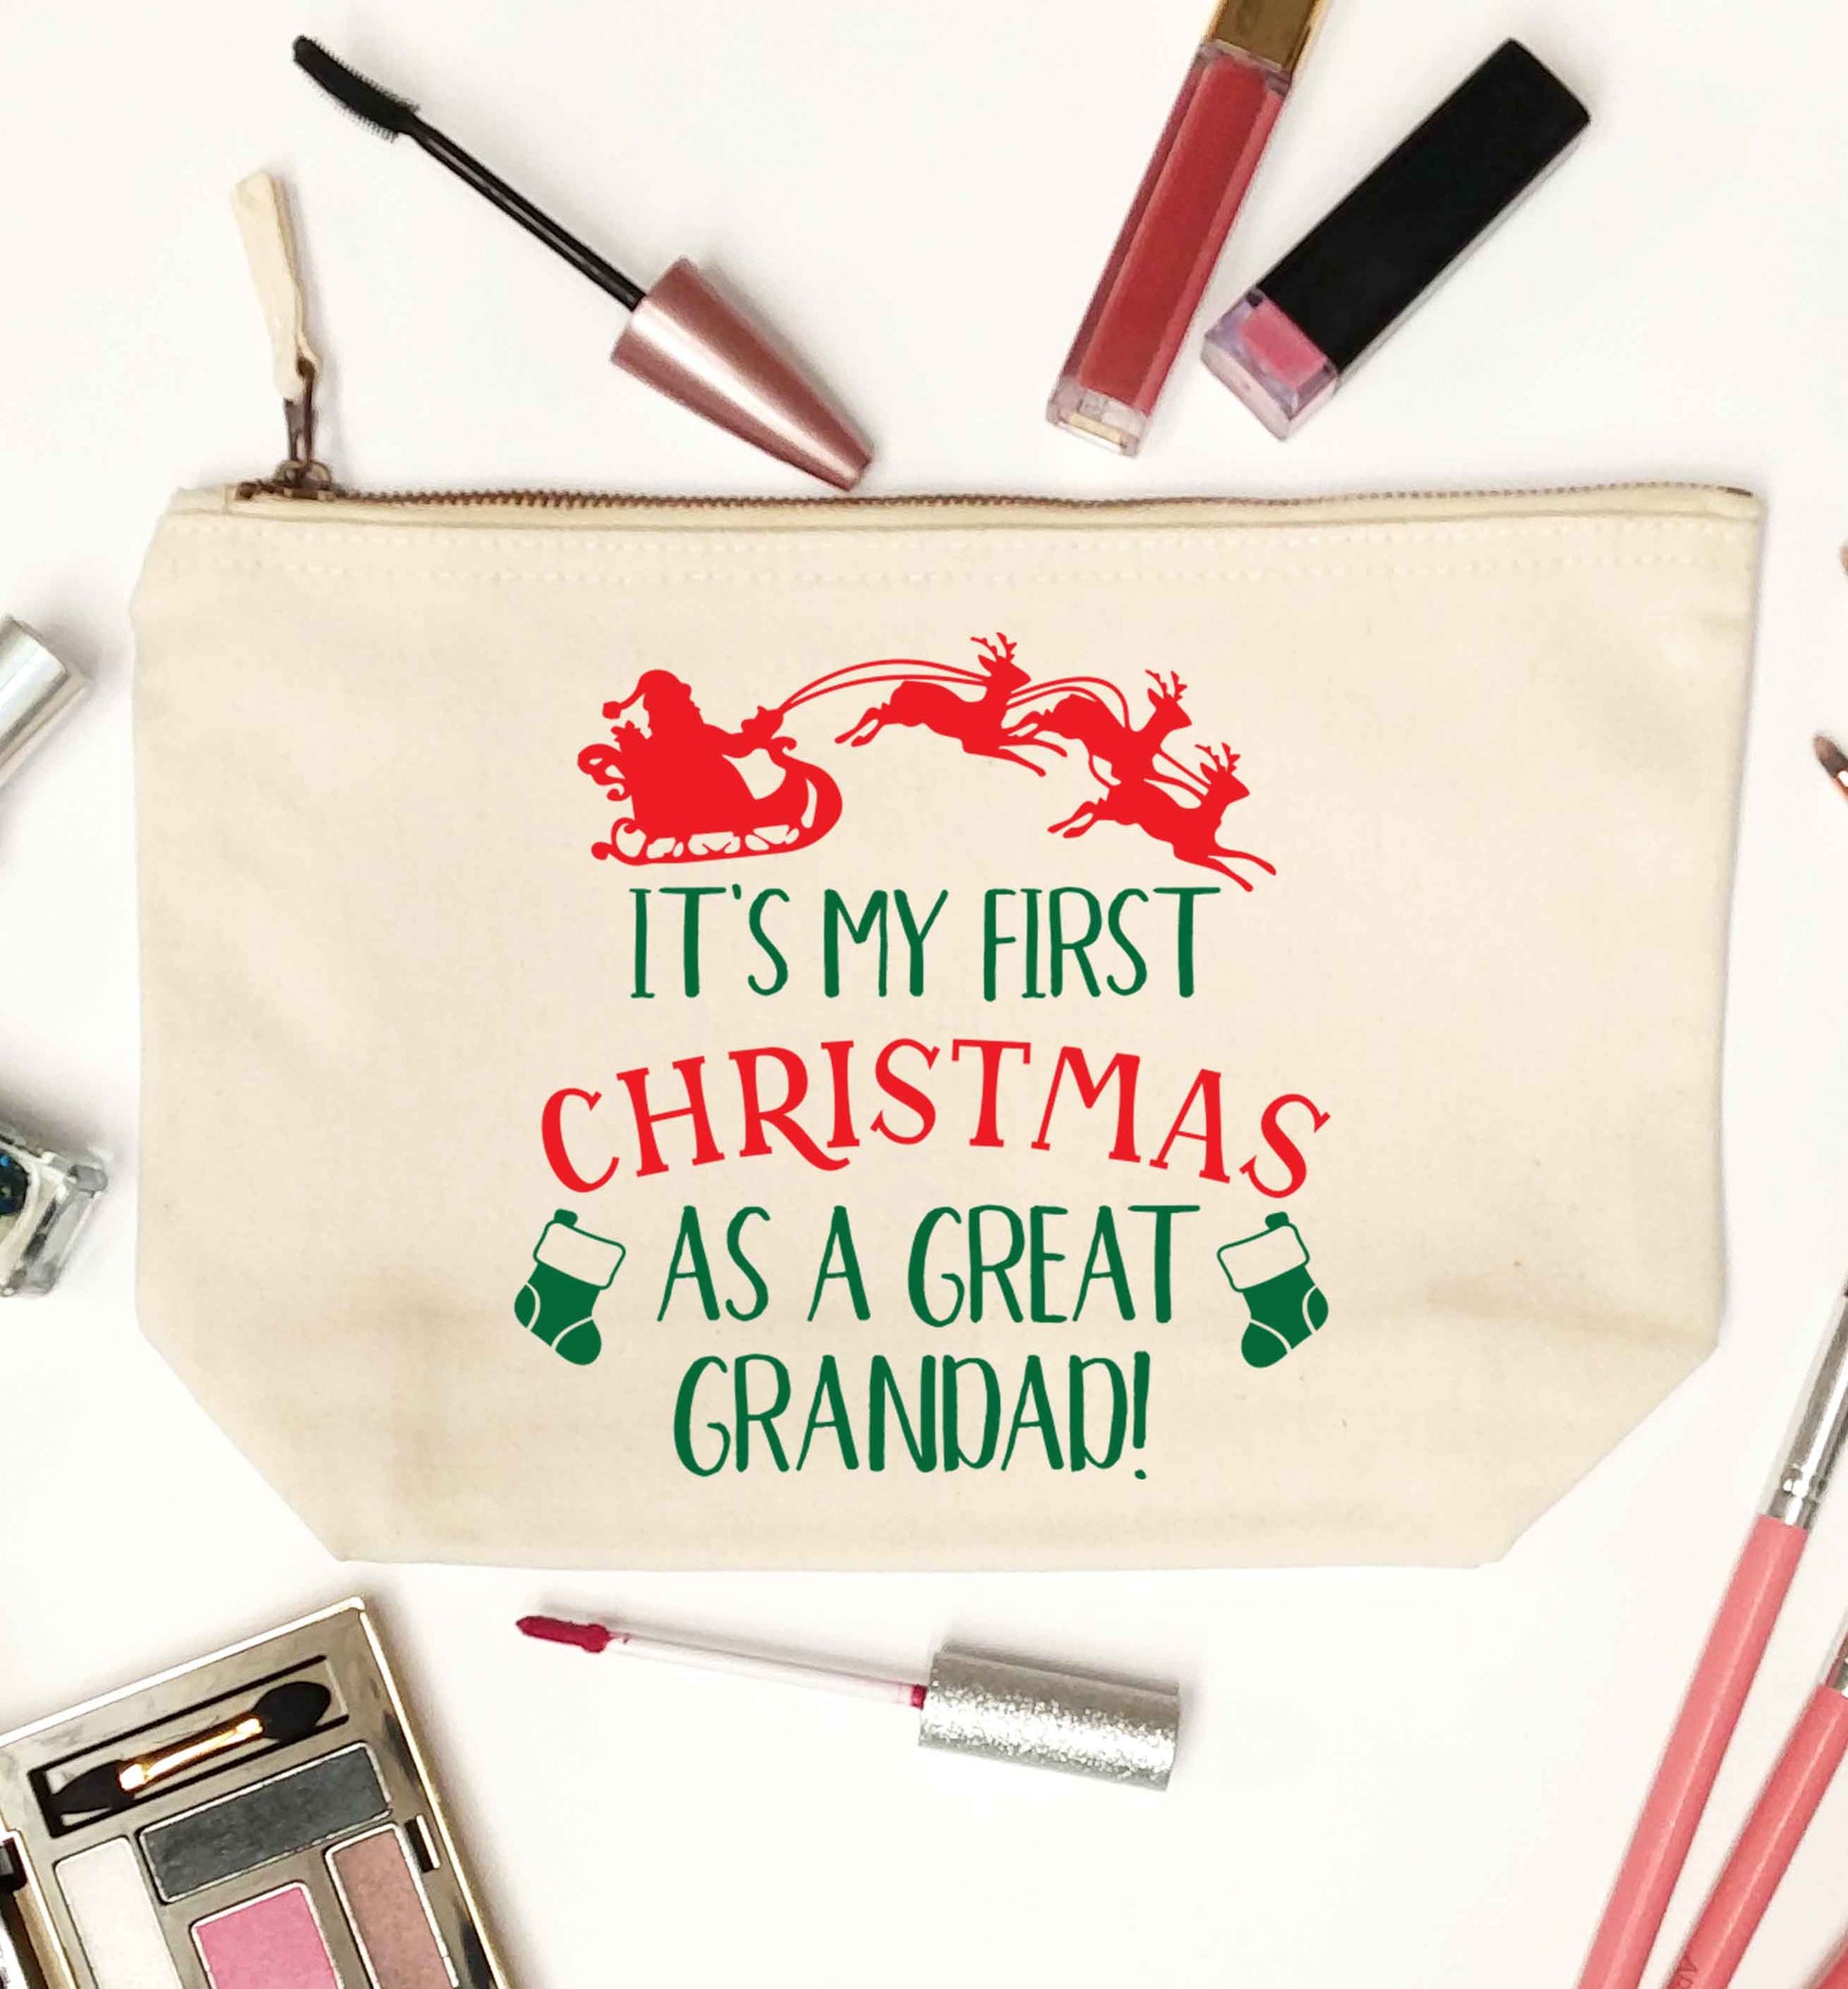 It's my first Christmas as a great grandad! natural makeup bag